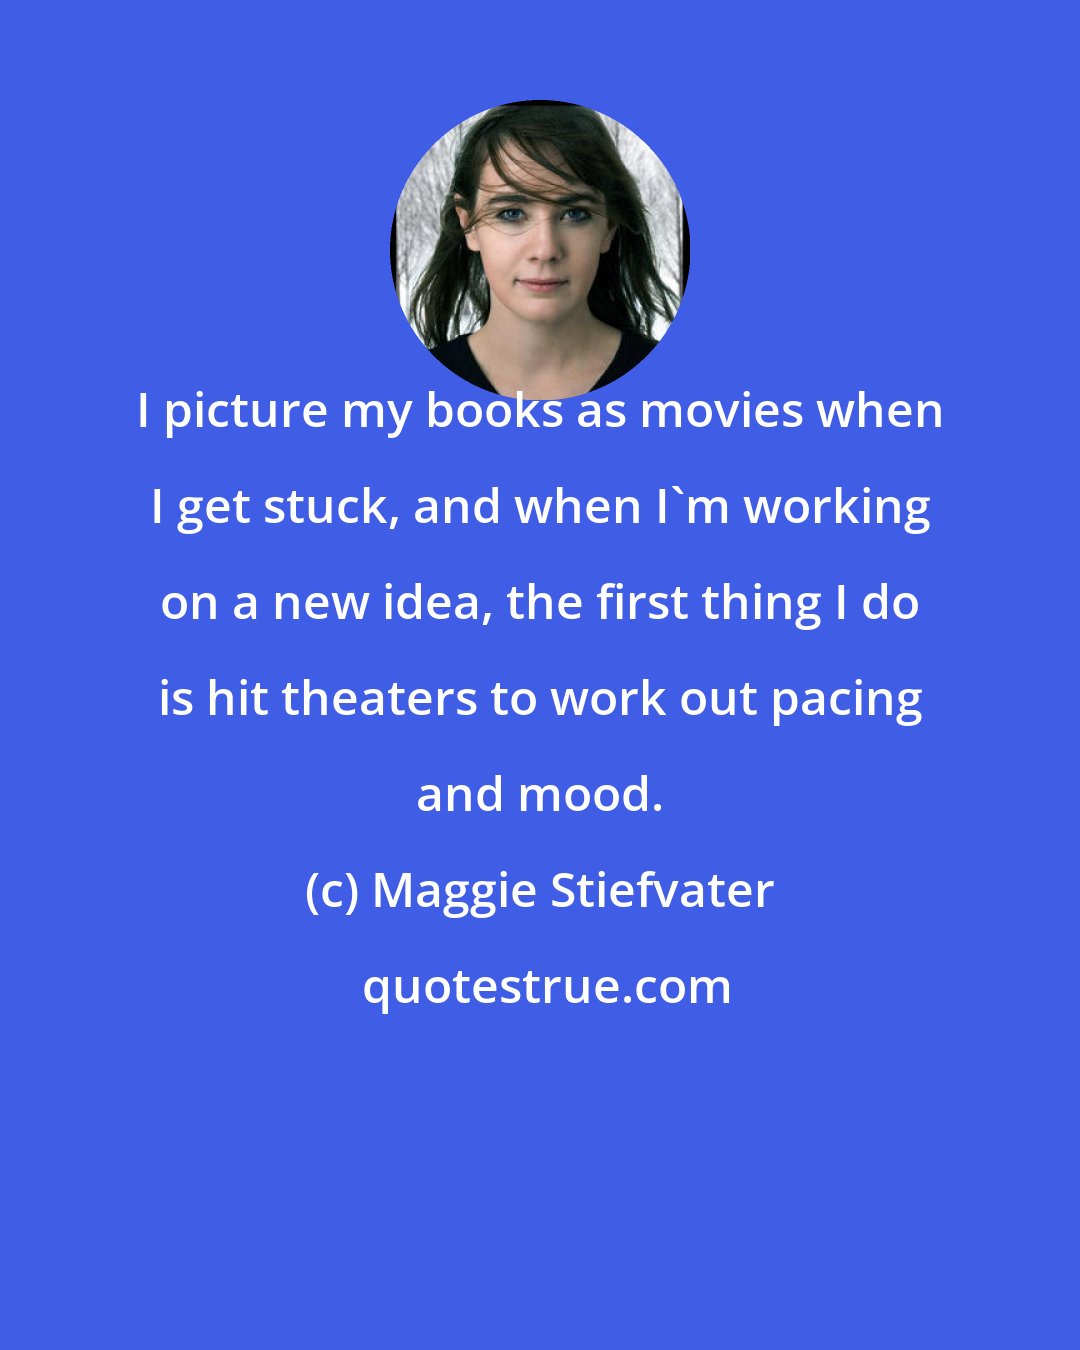 Maggie Stiefvater: I picture my books as movies when I get stuck, and when I'm working on a new idea, the first thing I do is hit theaters to work out pacing and mood.